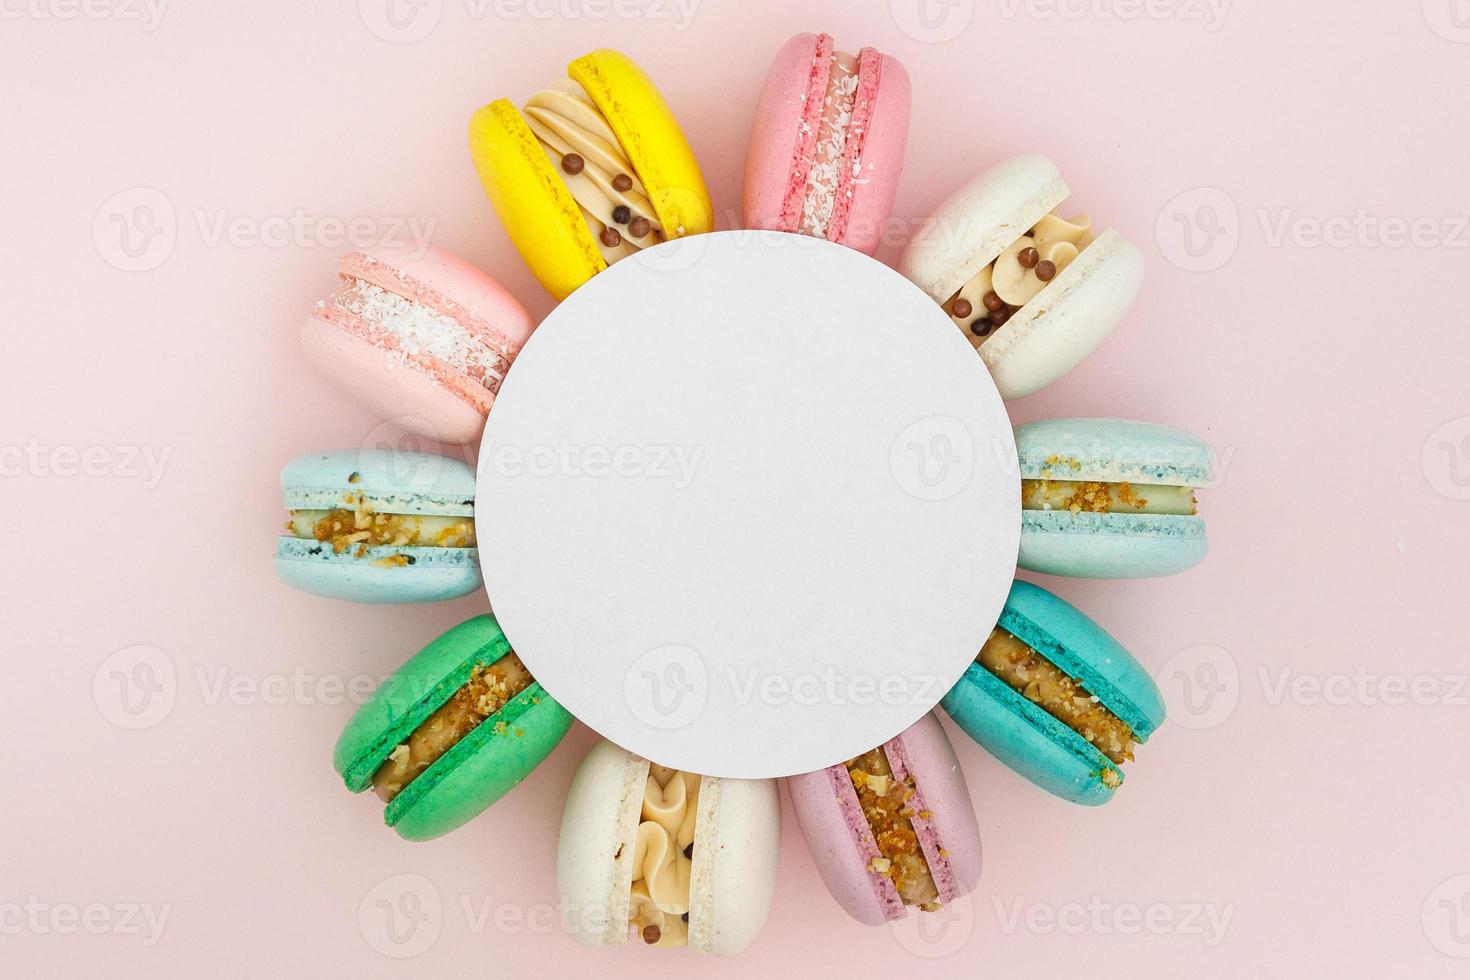 homemade macaroon from natural products on a blue background with a place for text photo